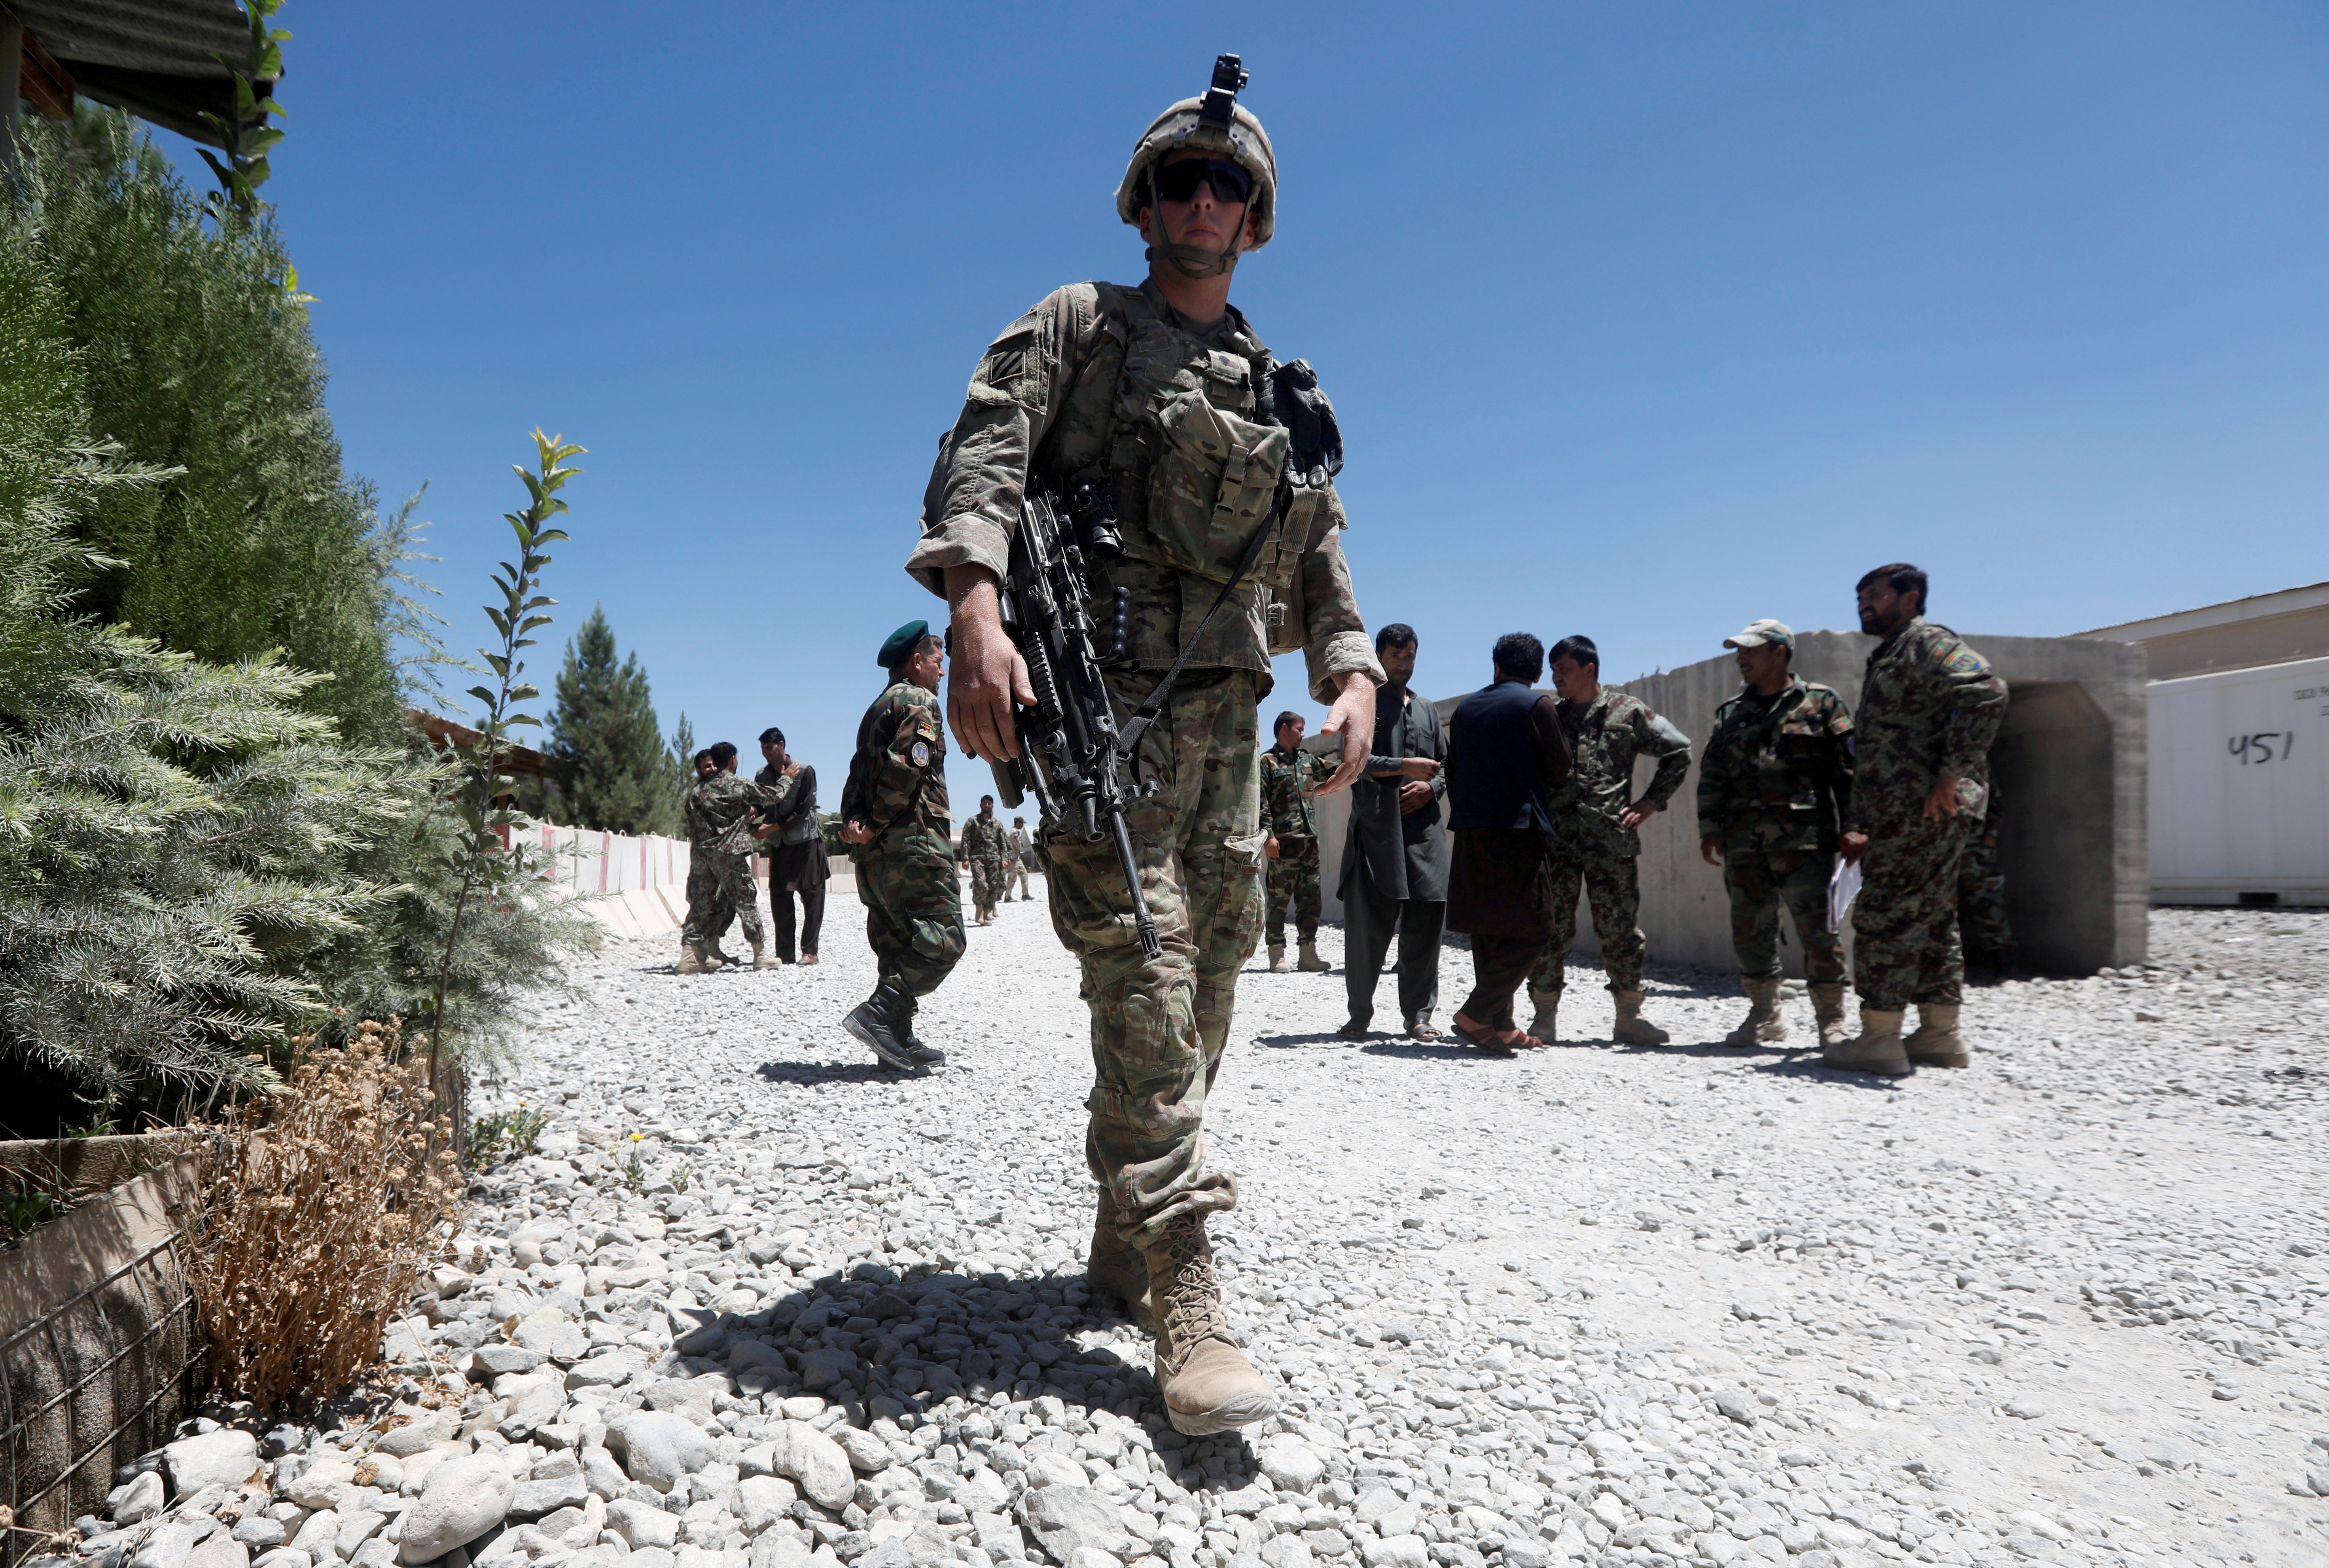 Here’s how we can save Afghanistan from ruin even as we withdraw American troops